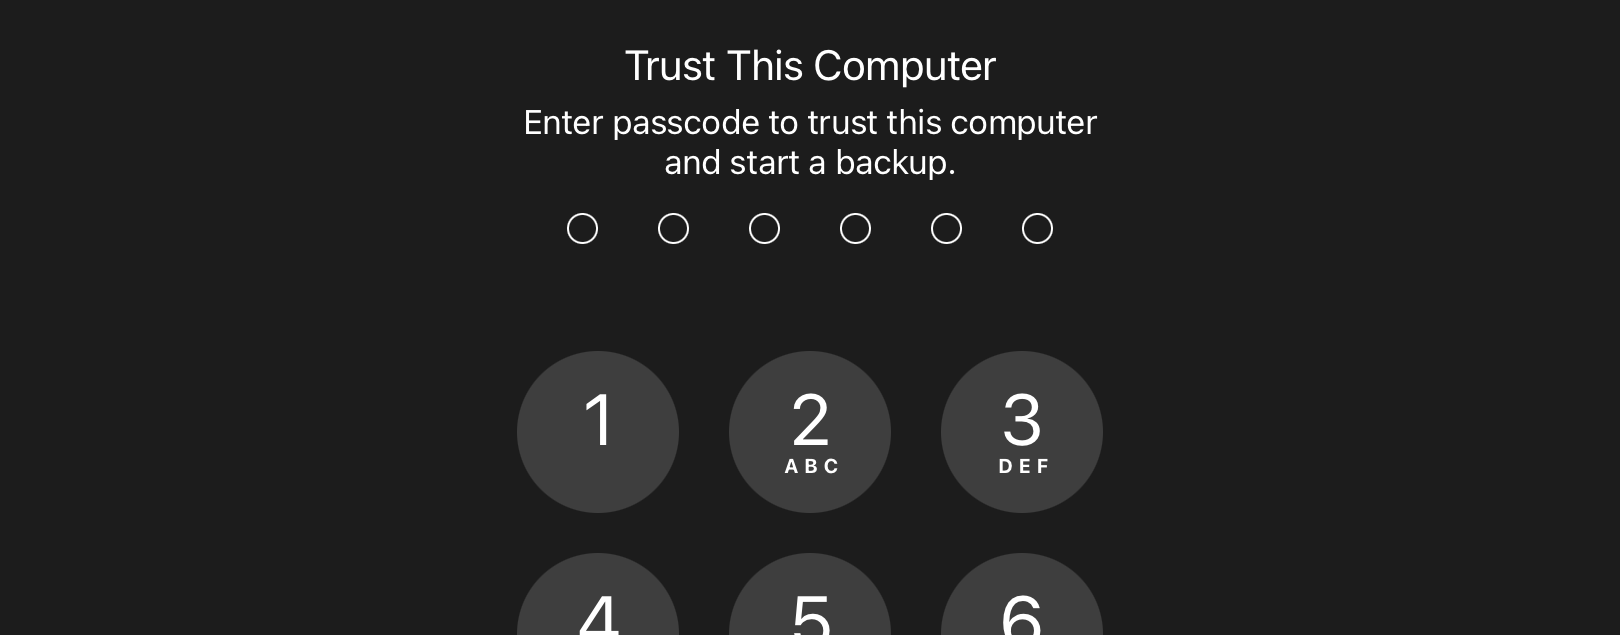 cropped trust computer ios 16-1.png